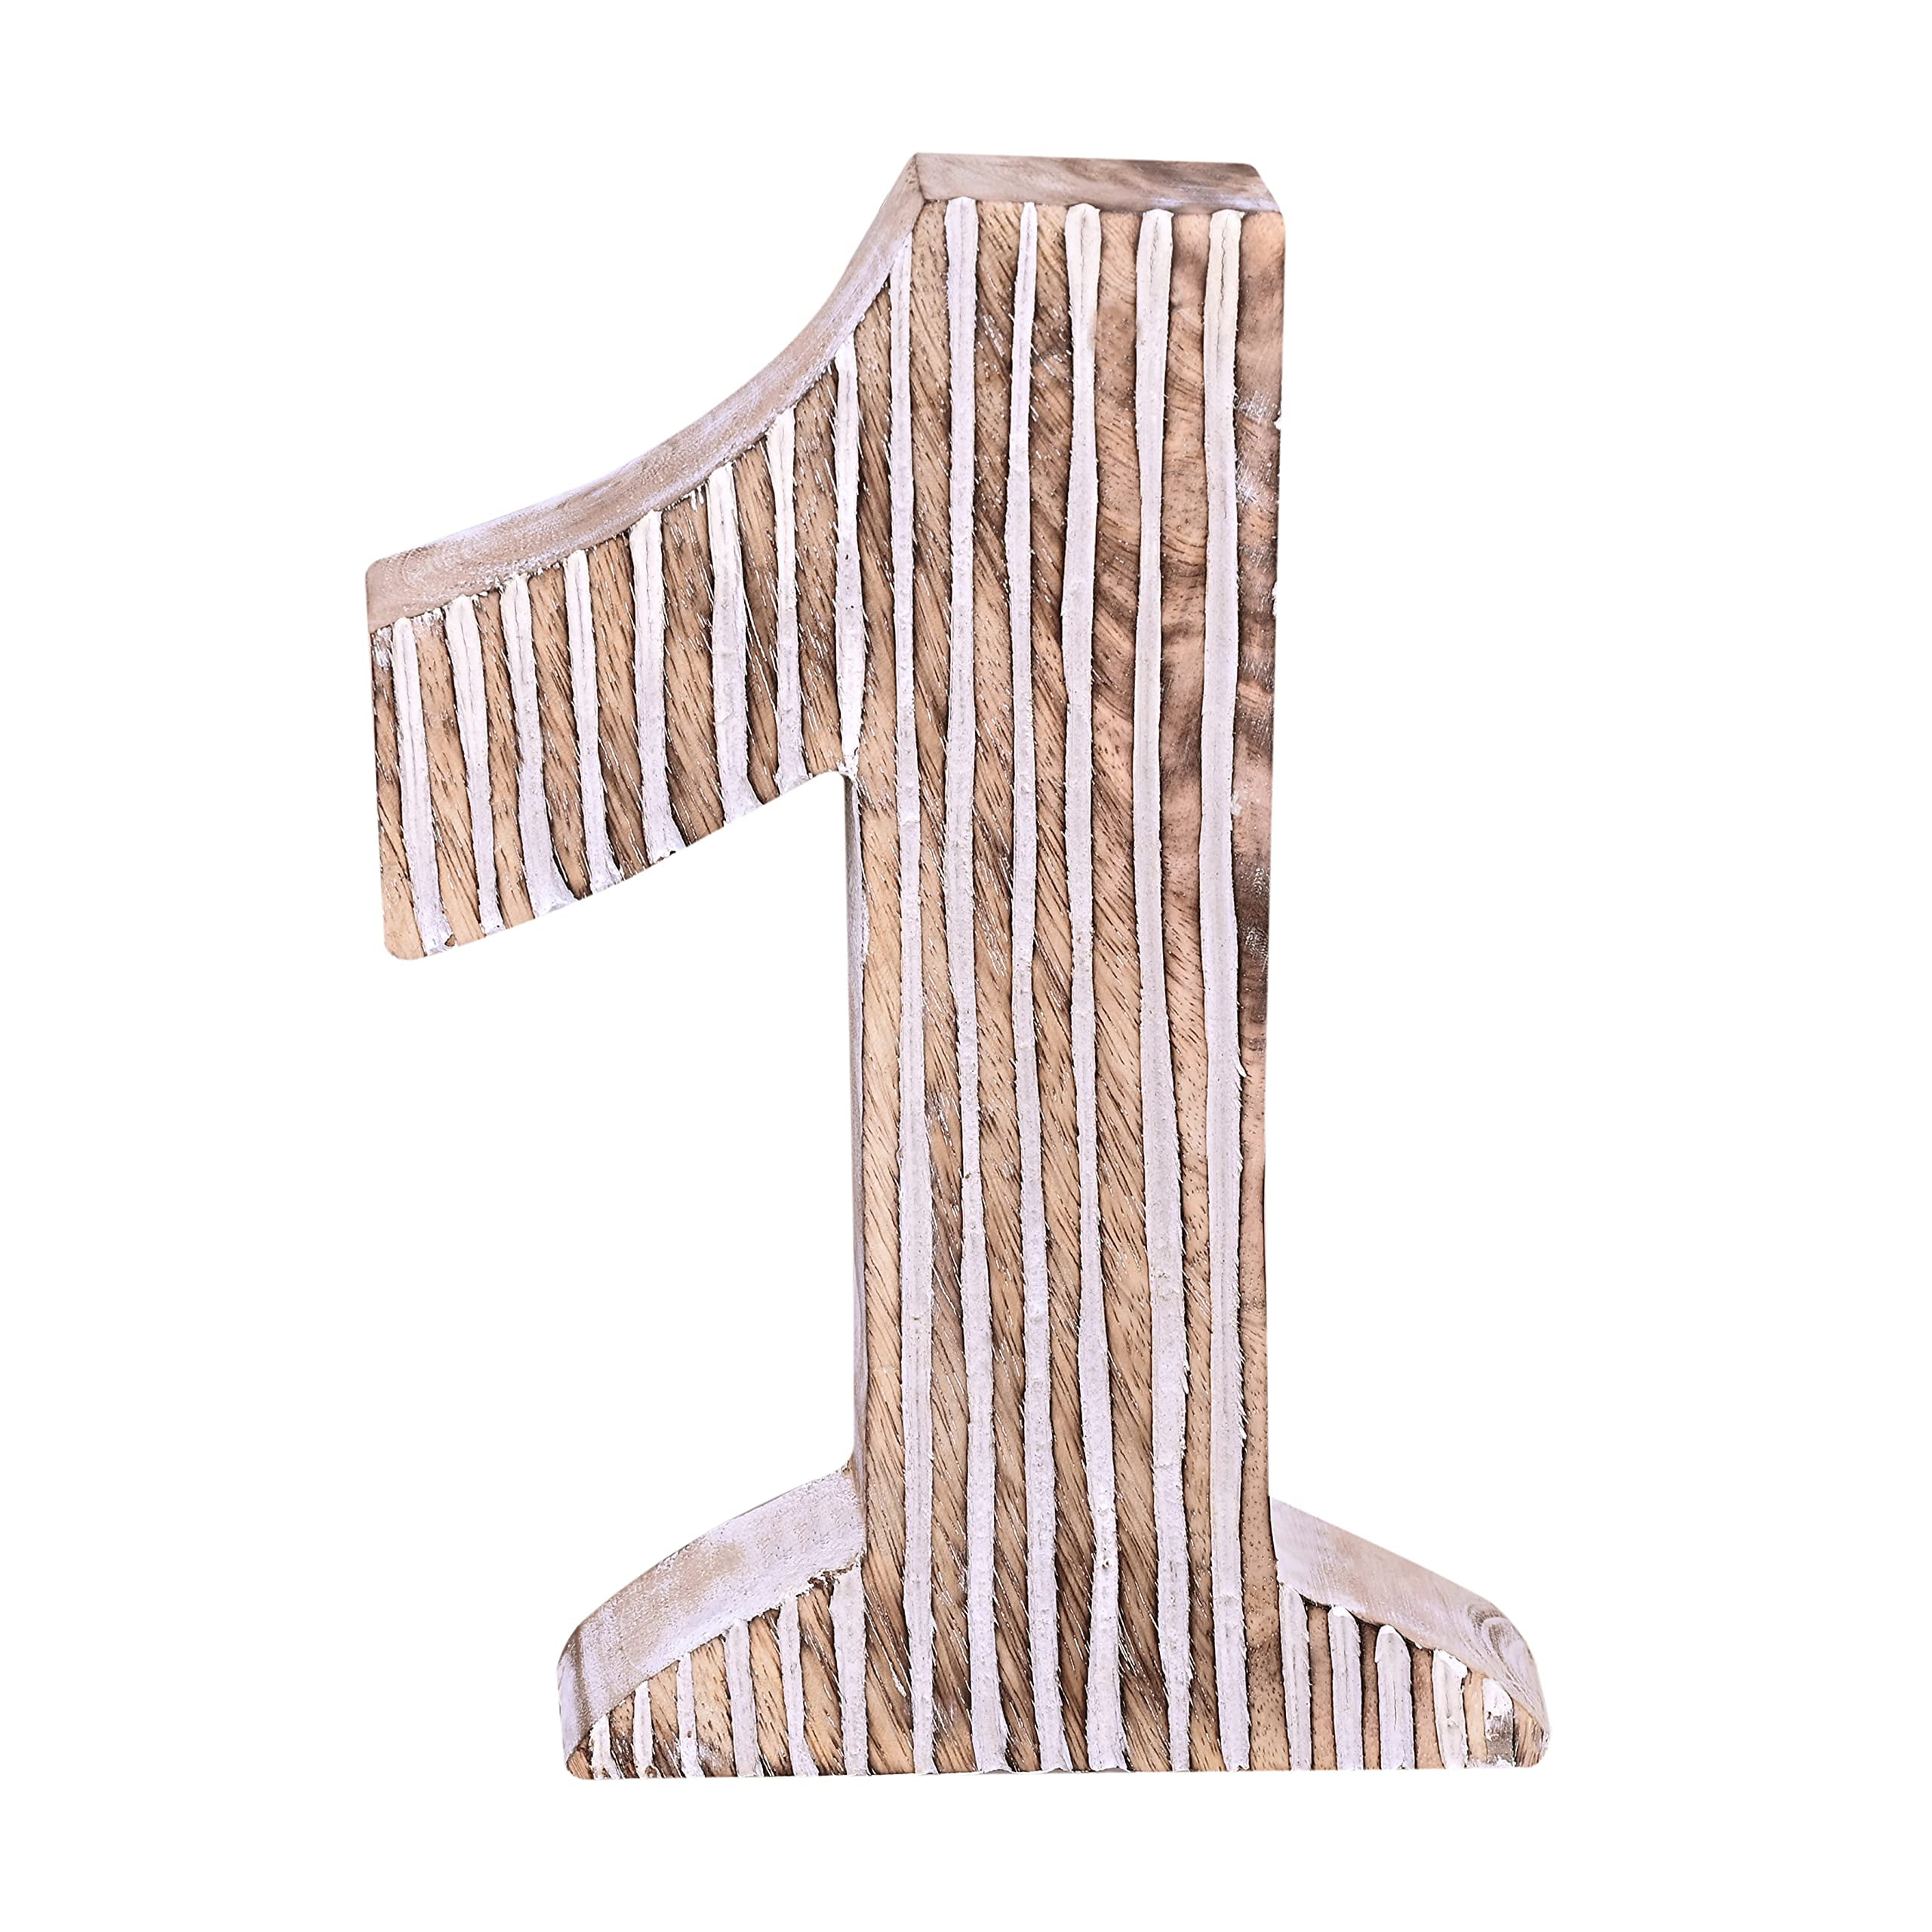 Shabby Chic Wood Number Letter for Wall Table Standing and Hanging Wooden Number Block for Wall Decor Decorative Wooden Number 5 Marquee Number Sign for Home Bedroom Birthday Housewarming Party 